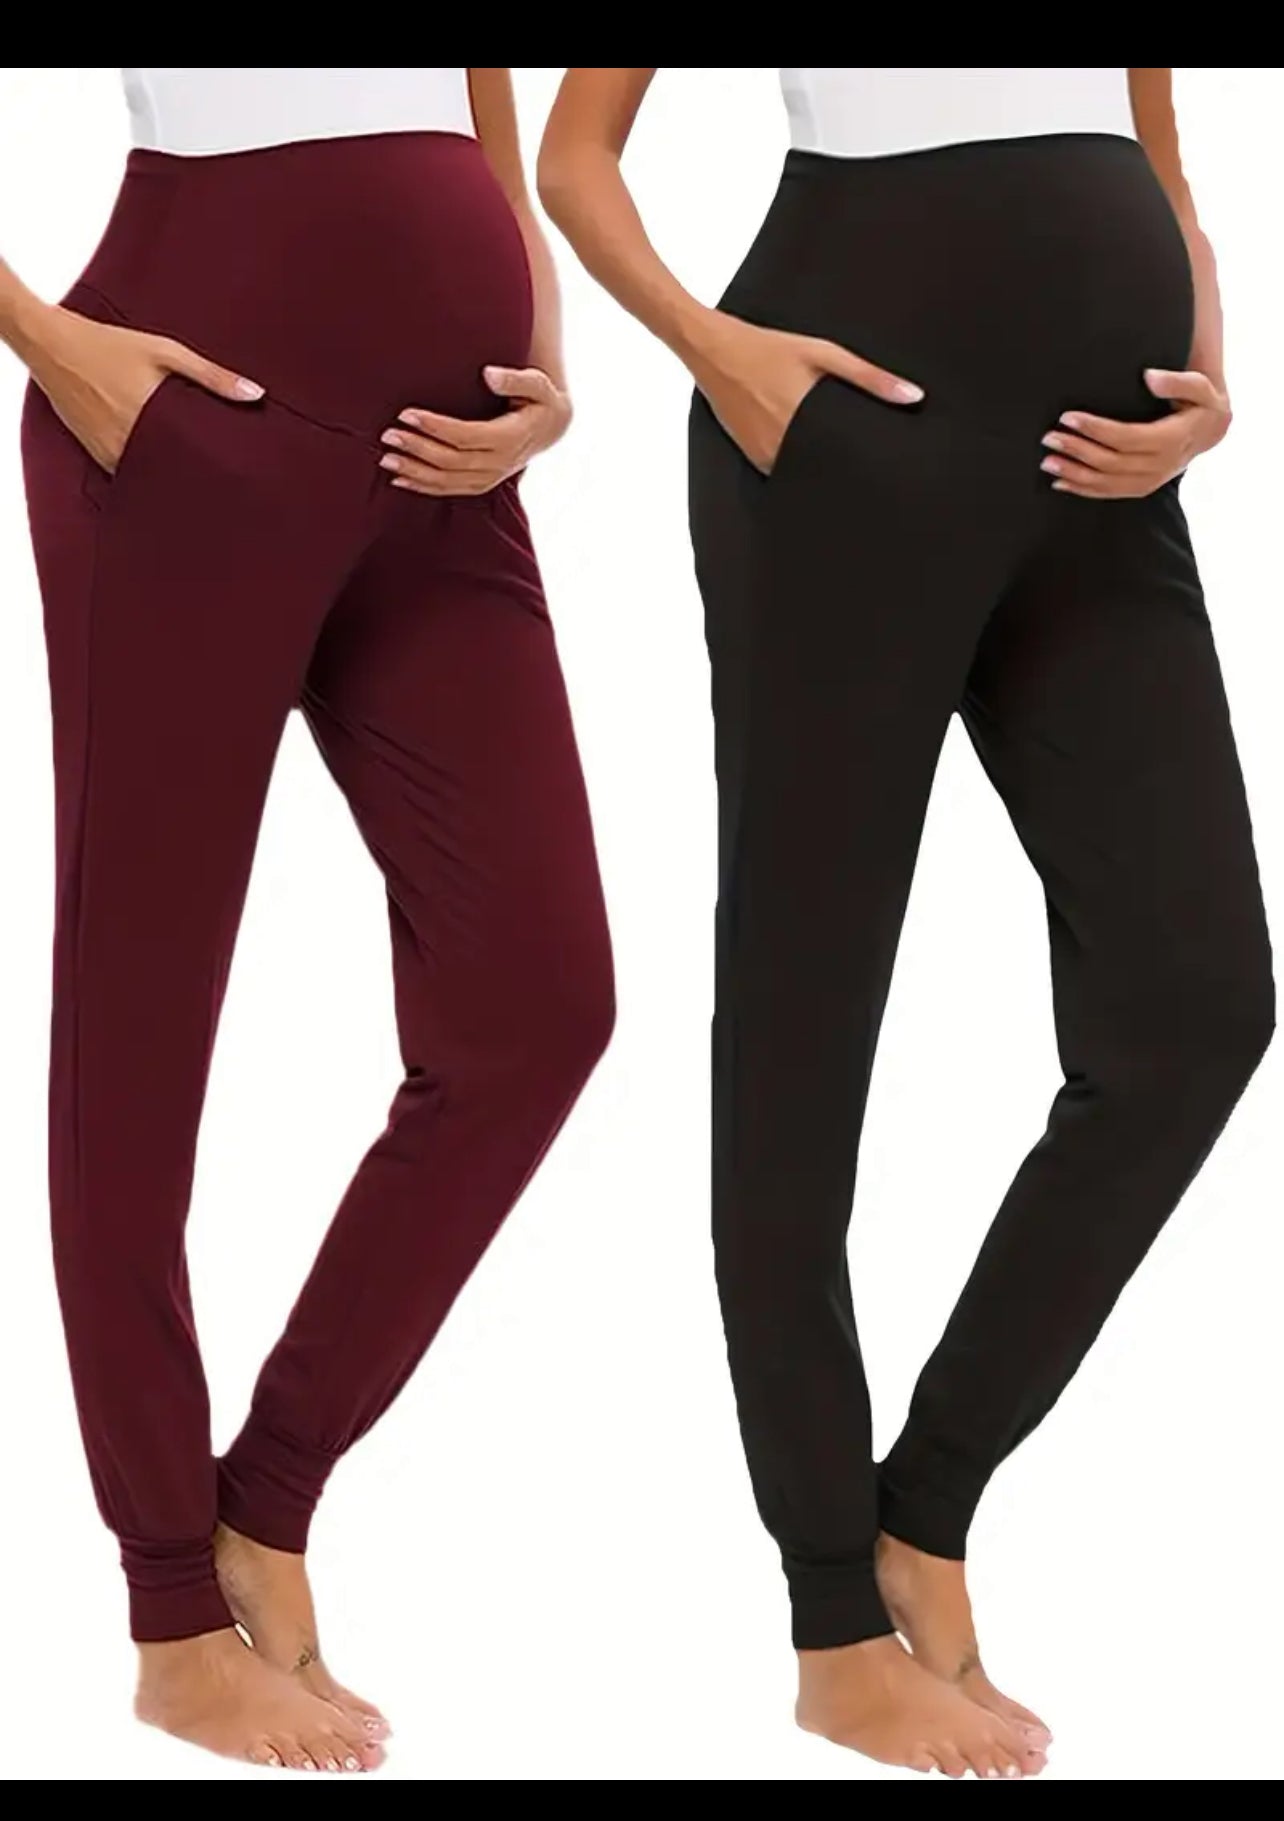 2pcs Comfy High Waist Tummy Support Maternity Sports Yoga Pants With Pocket, Baby Bumps 🌟🌙 Collection